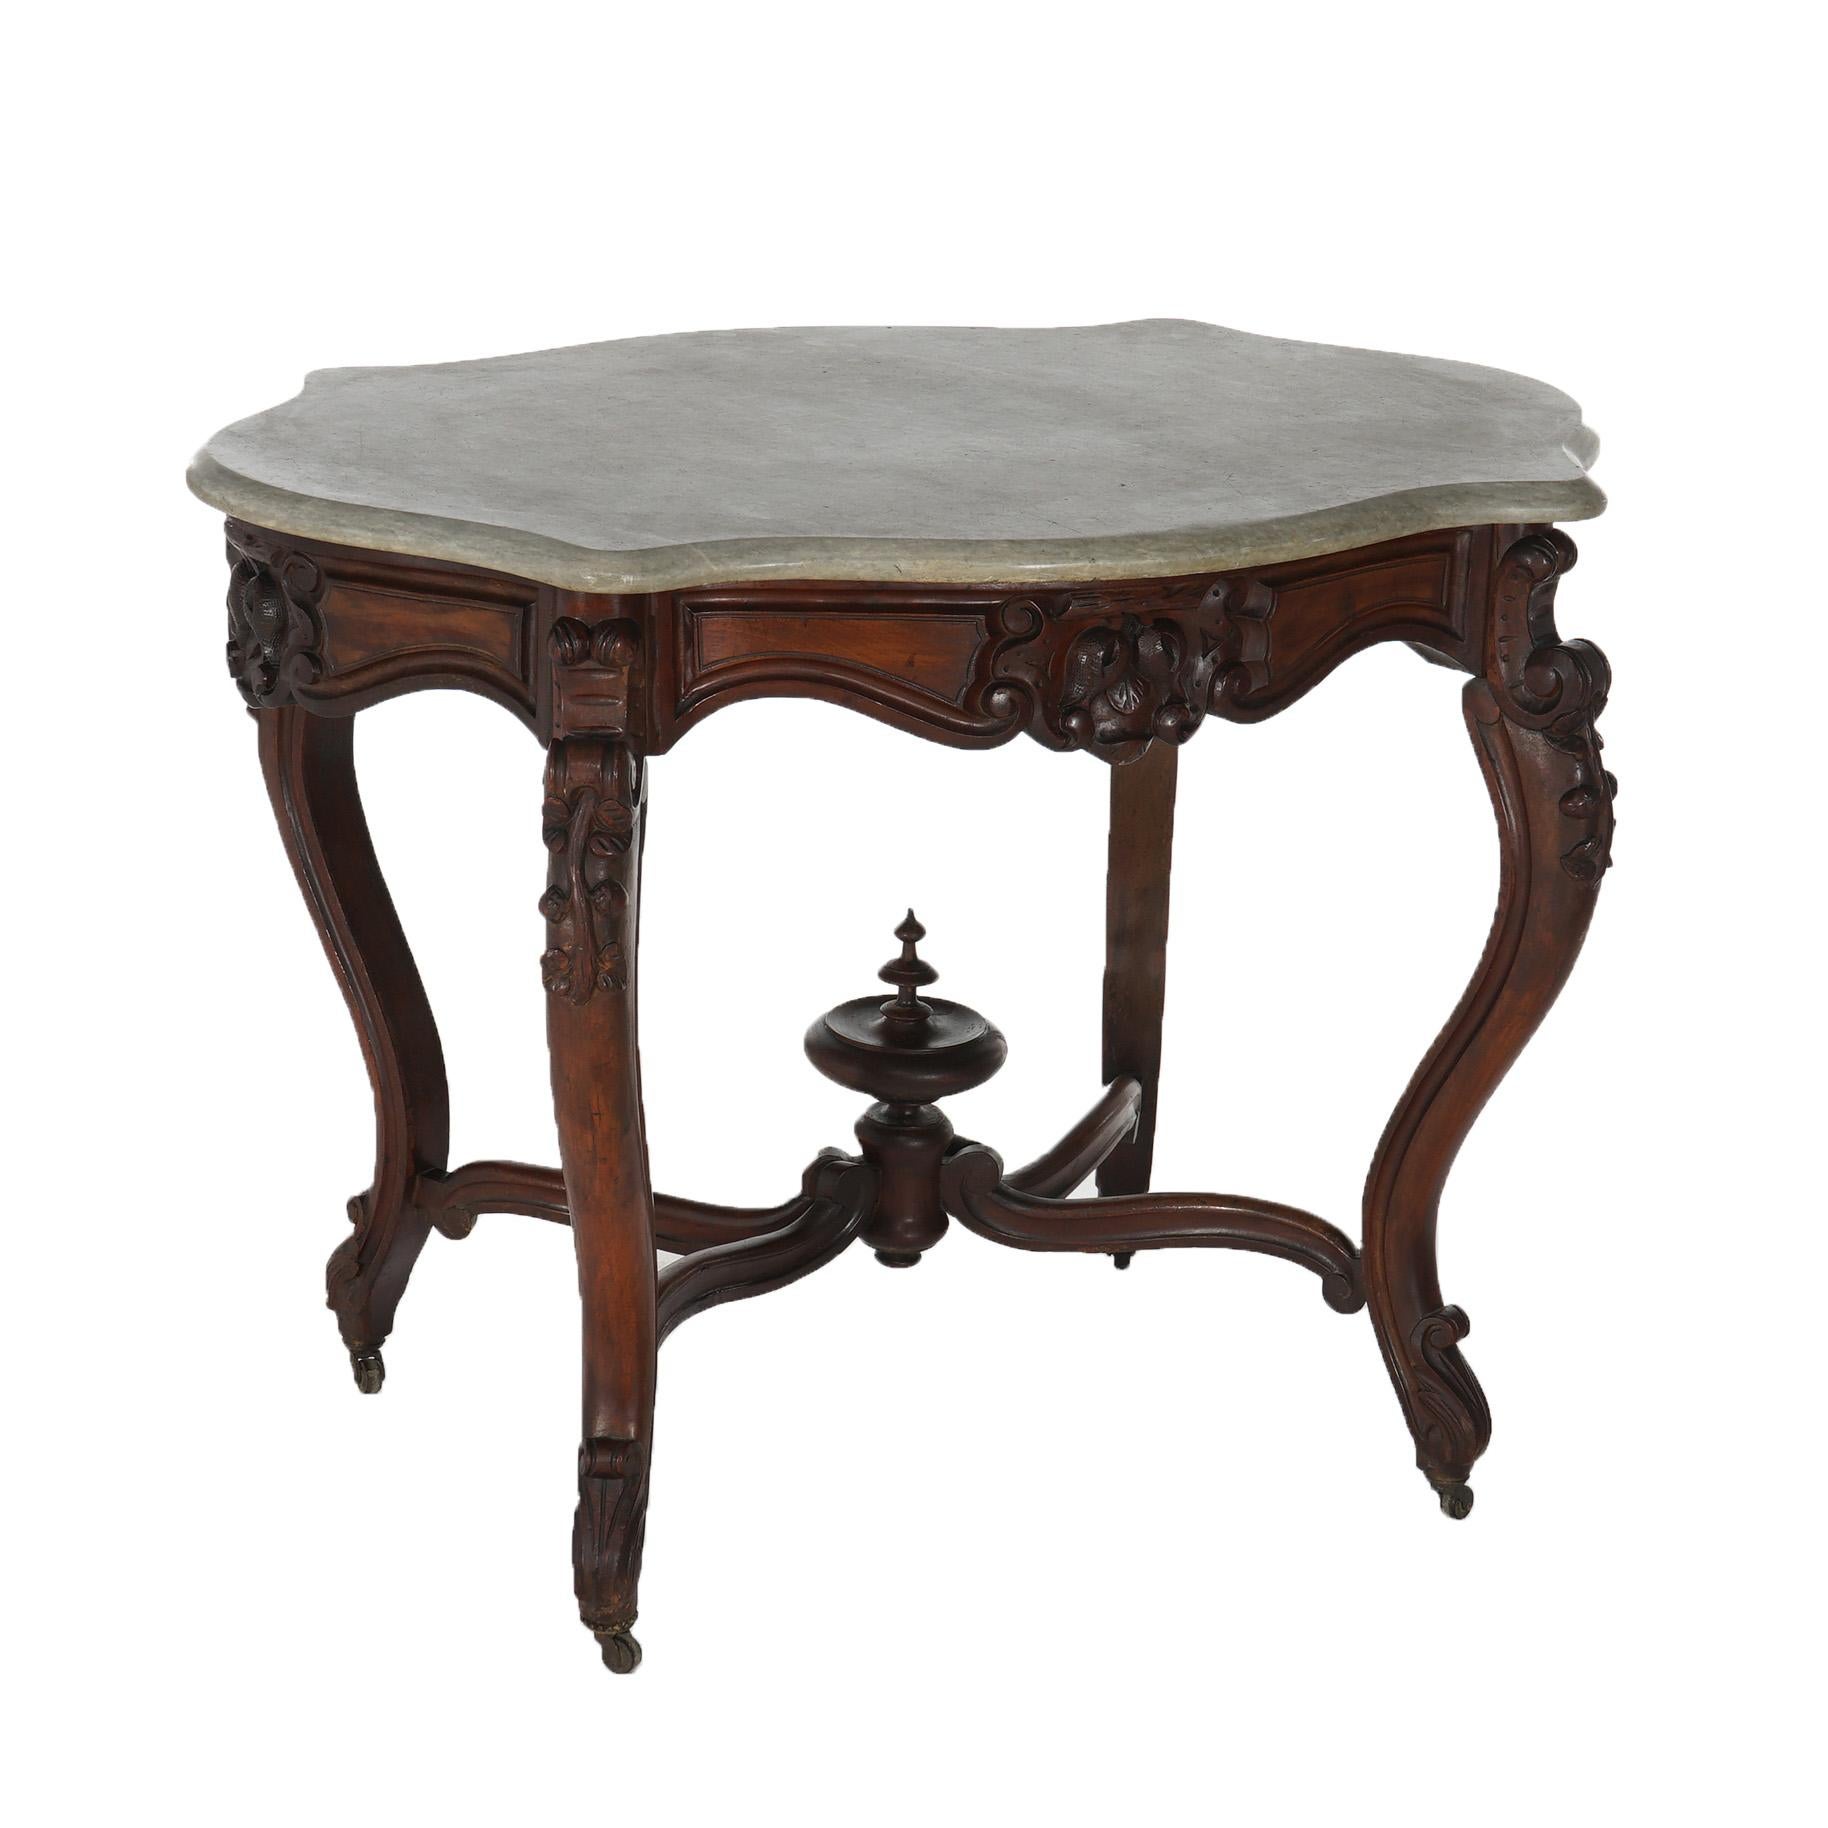 Beveled Antique Victorian Rococo Carved Walnut & Marble Top Parlor Table C1800 For Sale